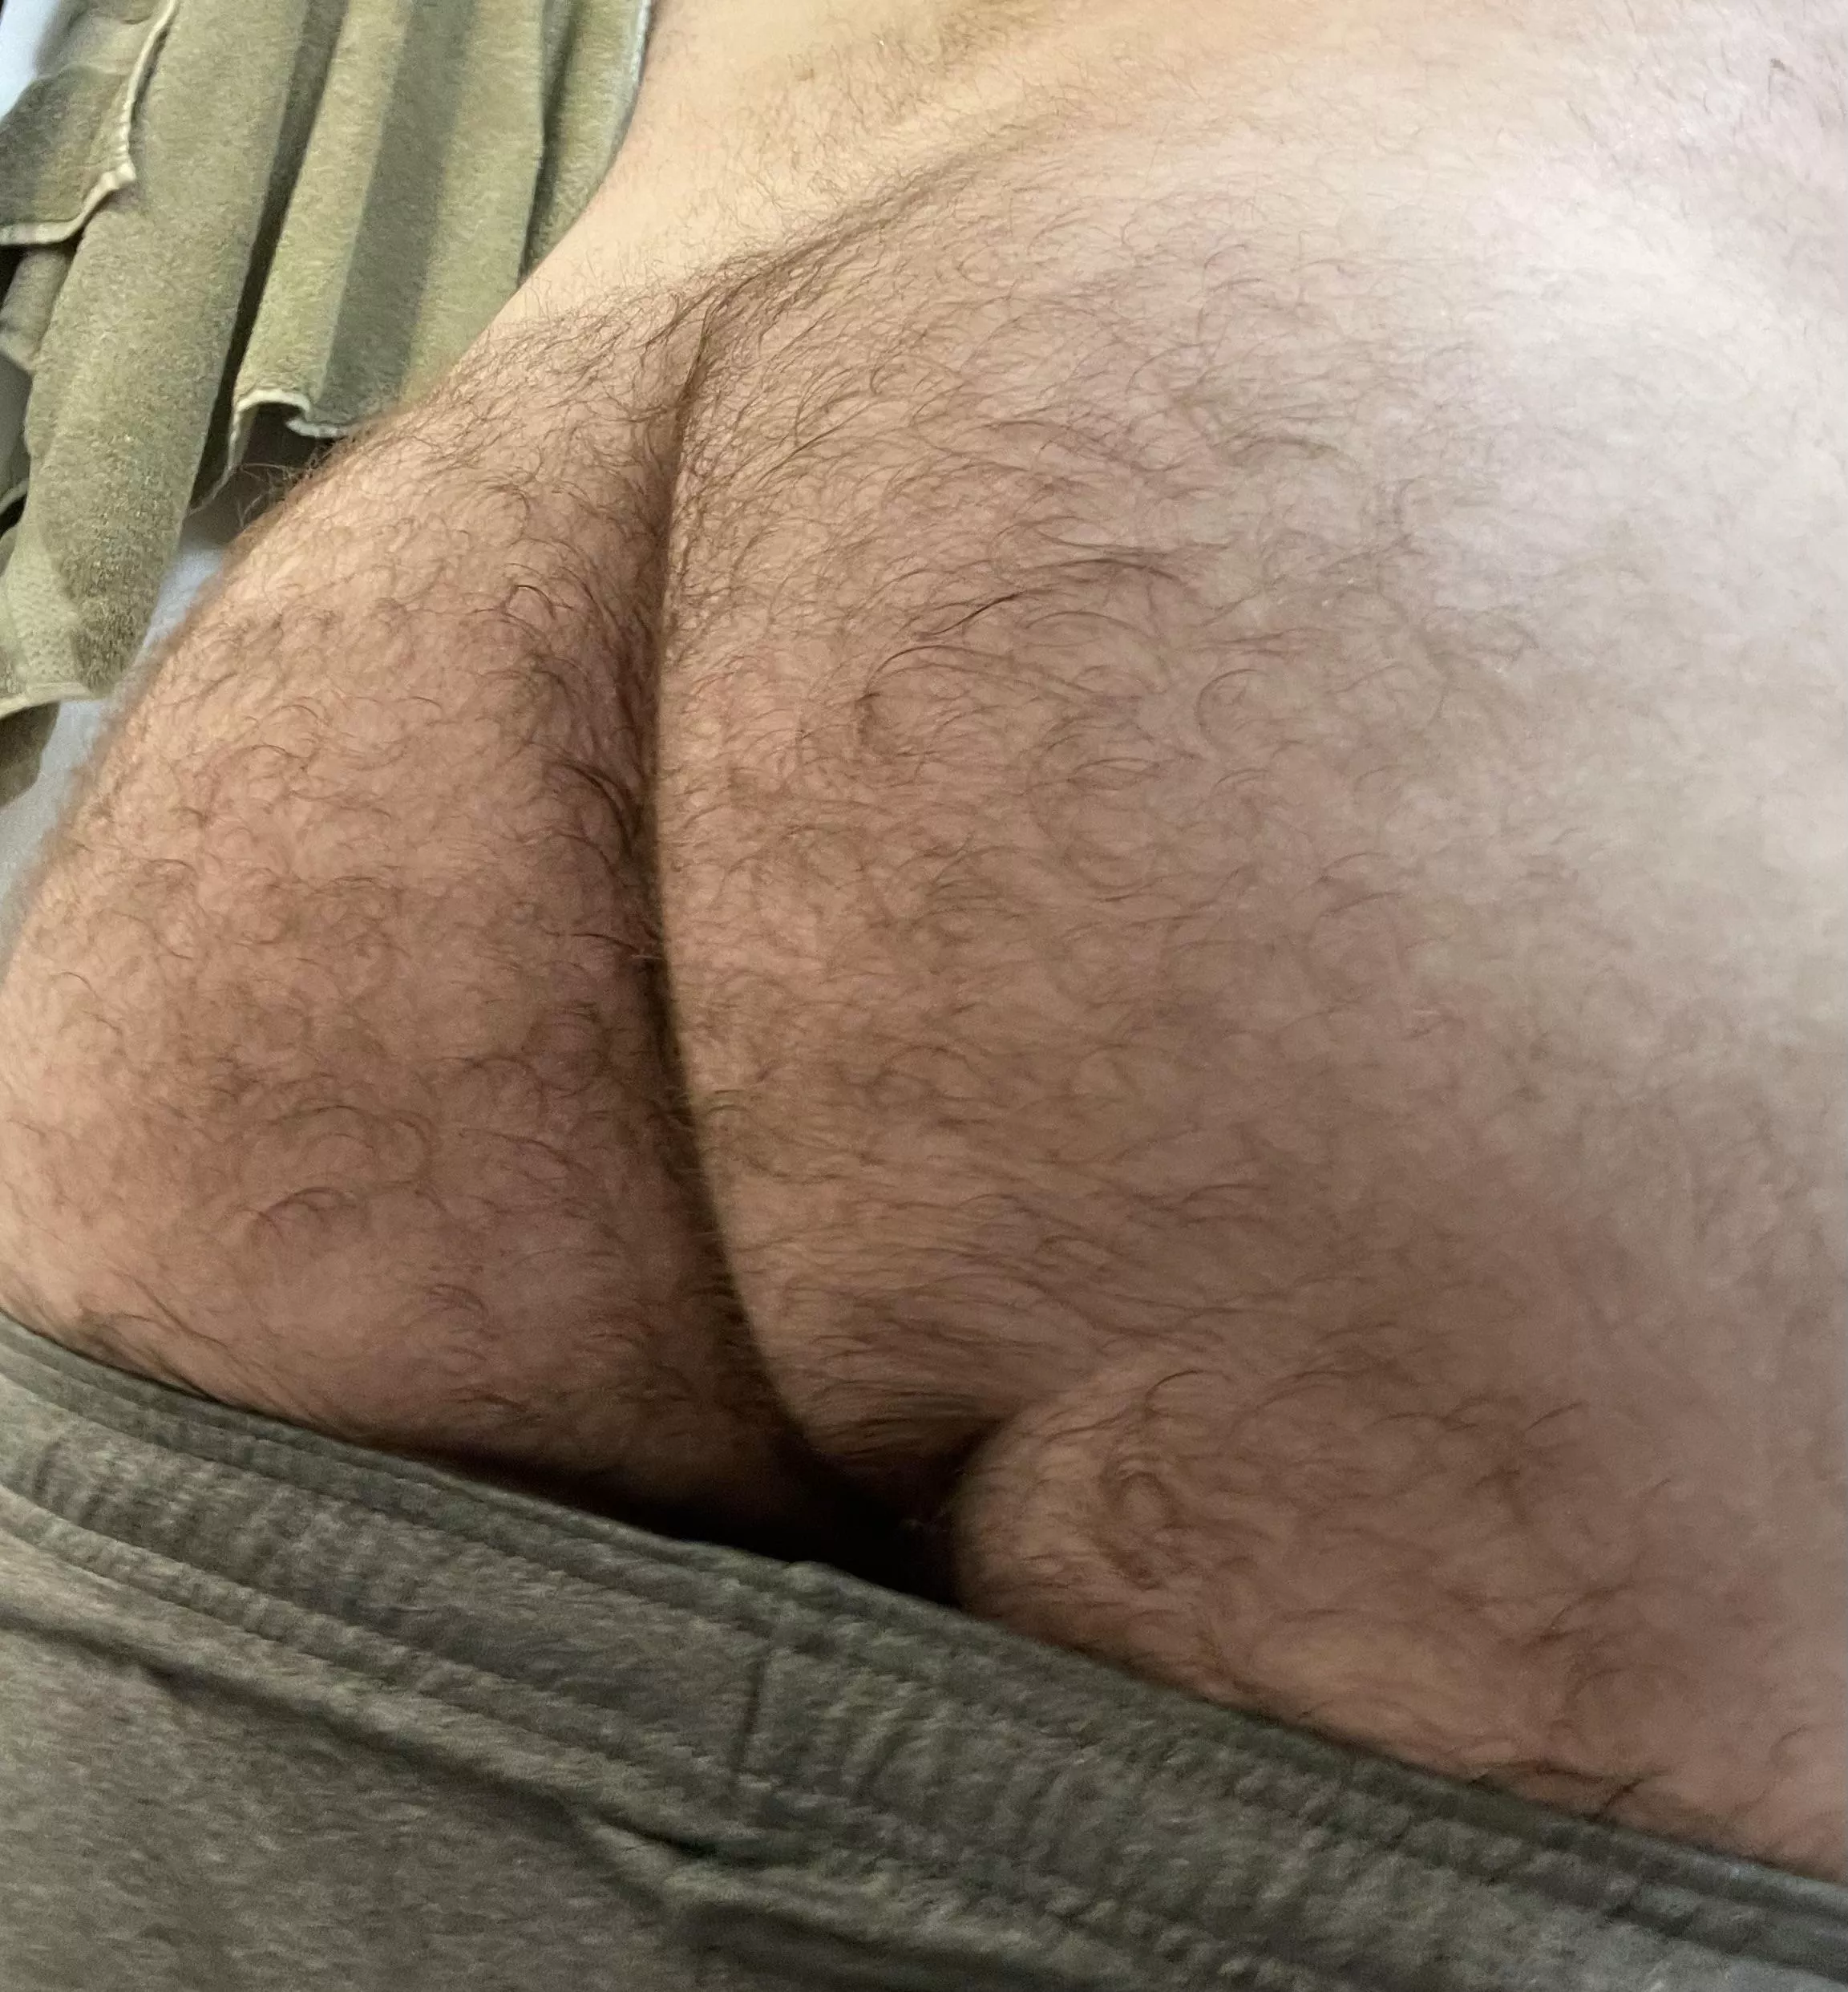 Hairy Ass Gallery